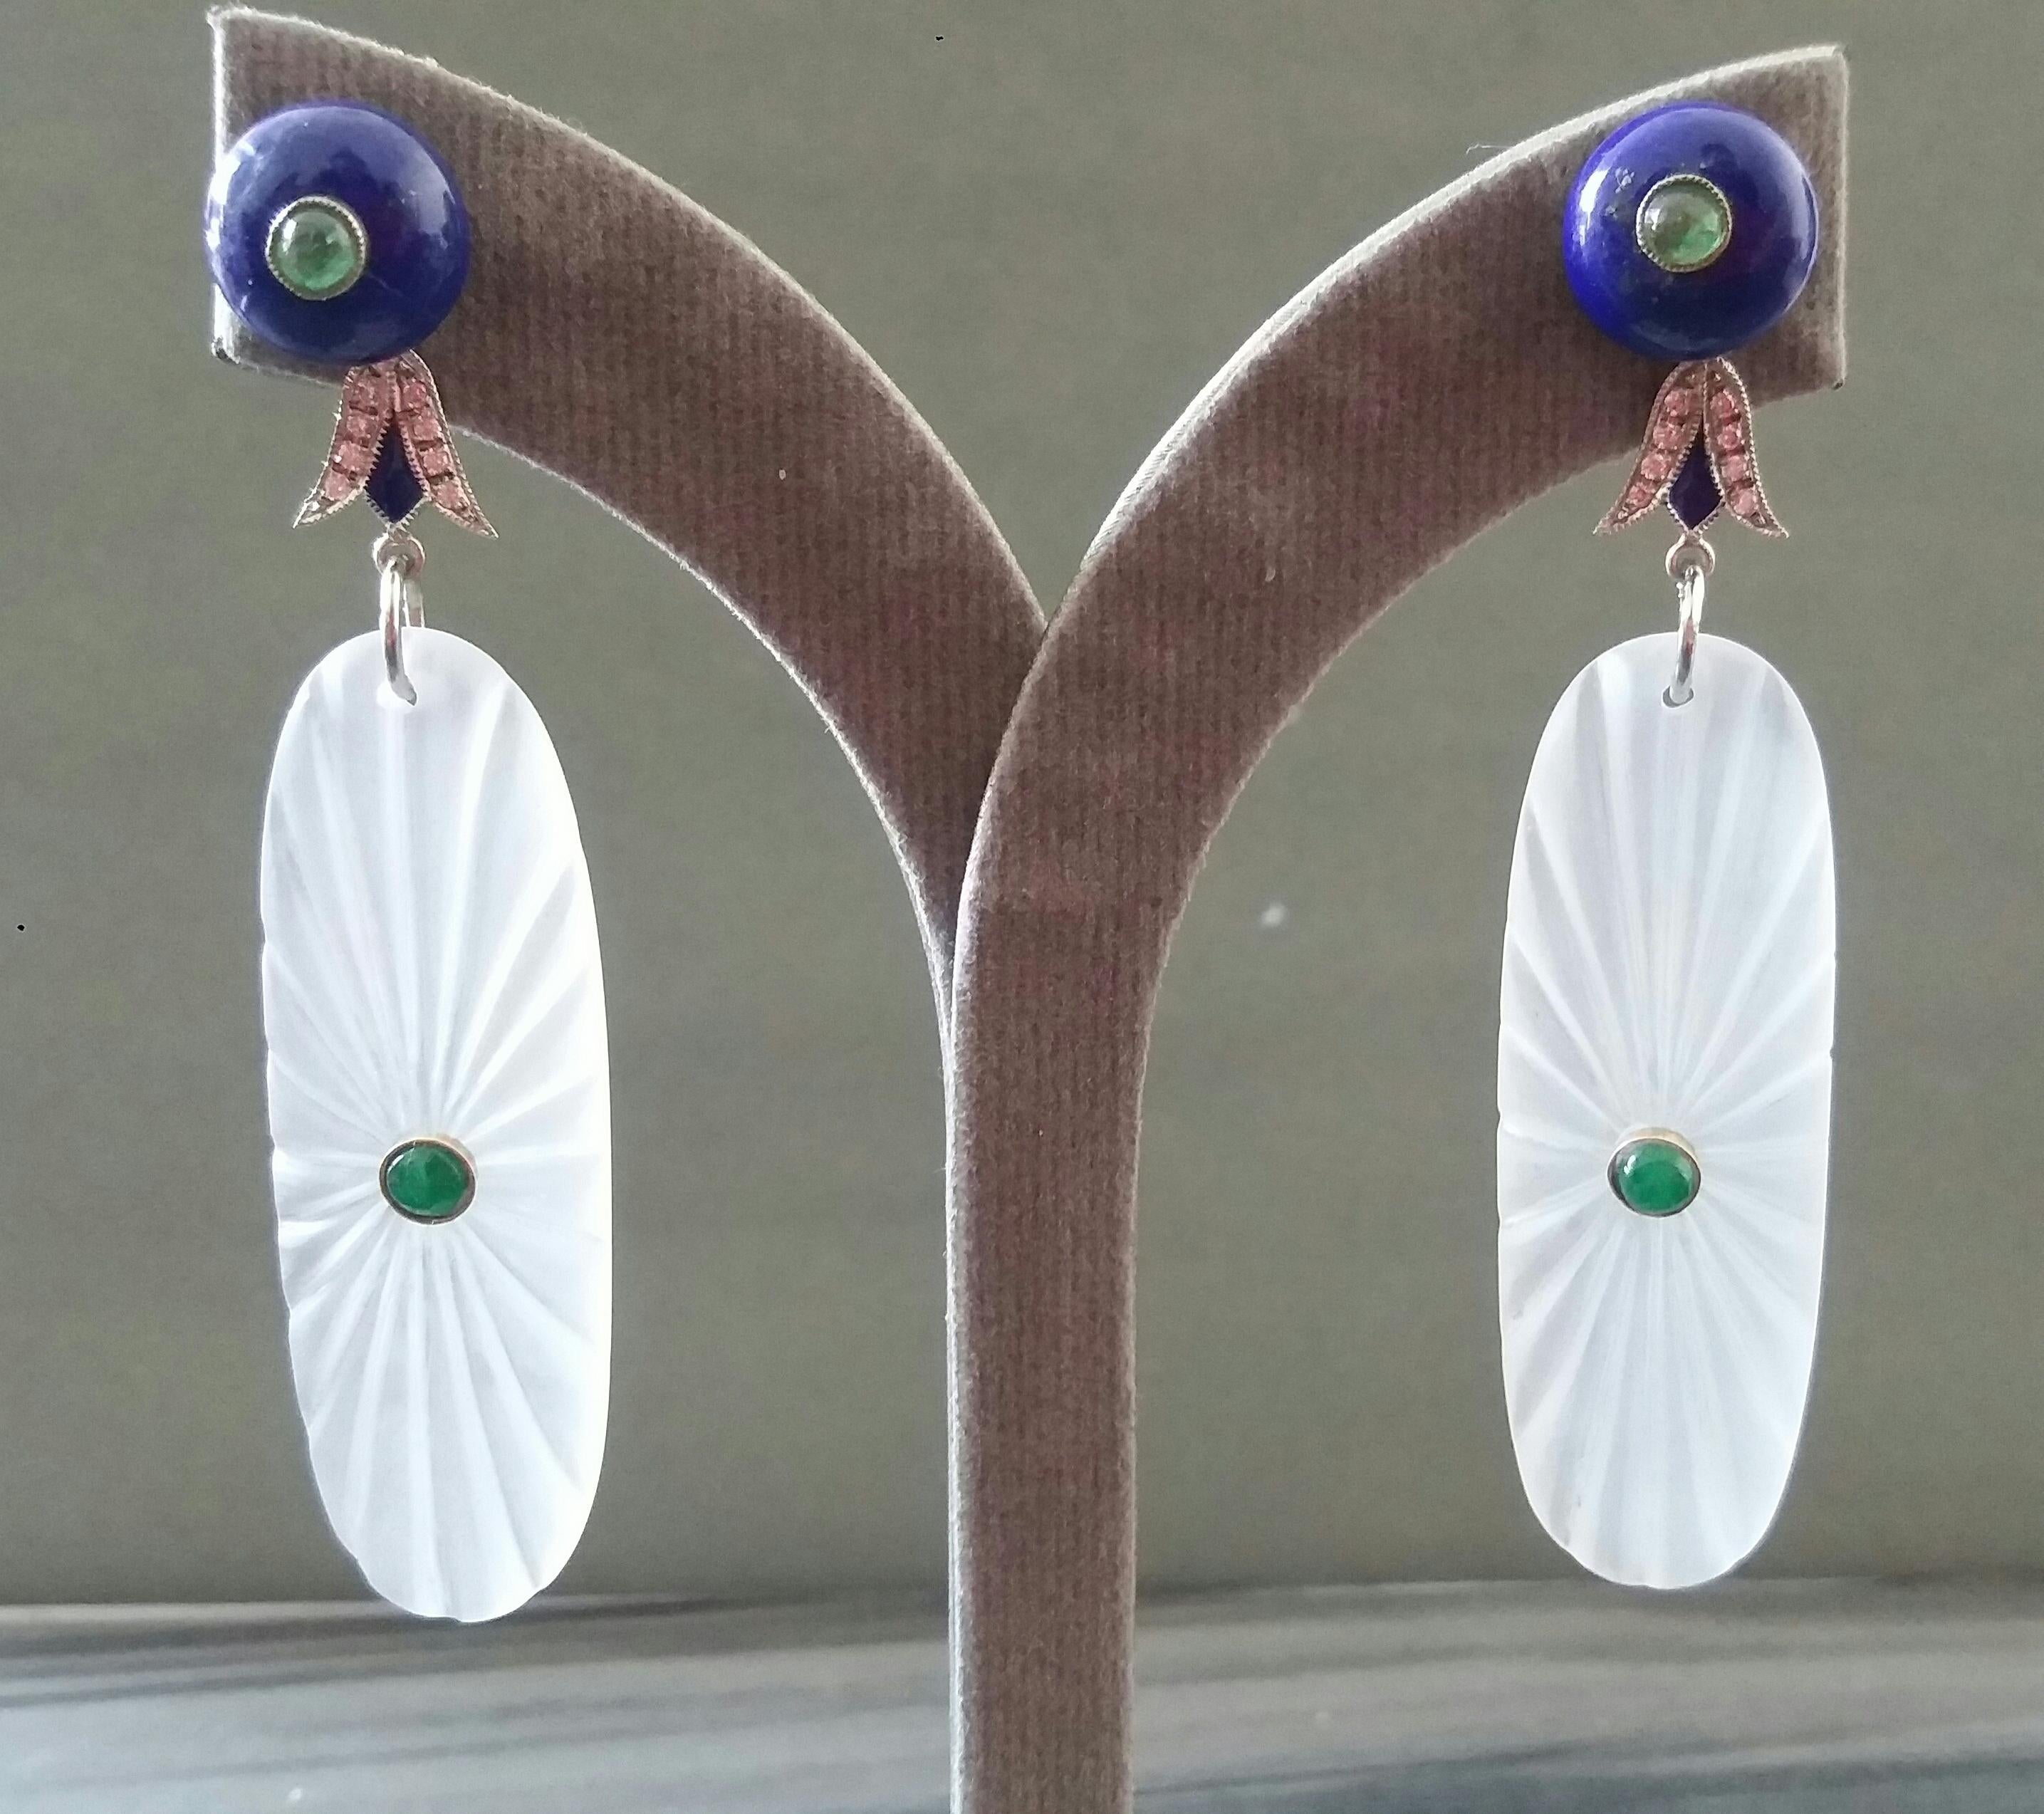 2 round Lapis Lazuli buttons with small emerald round cabs in the center  are on top, middle parts in white gold ,16 round full cut diamonds,blue enamel,2  Rock Crystal  engraved ovals  50 mm long with small Emerald round cabochons set in gold in